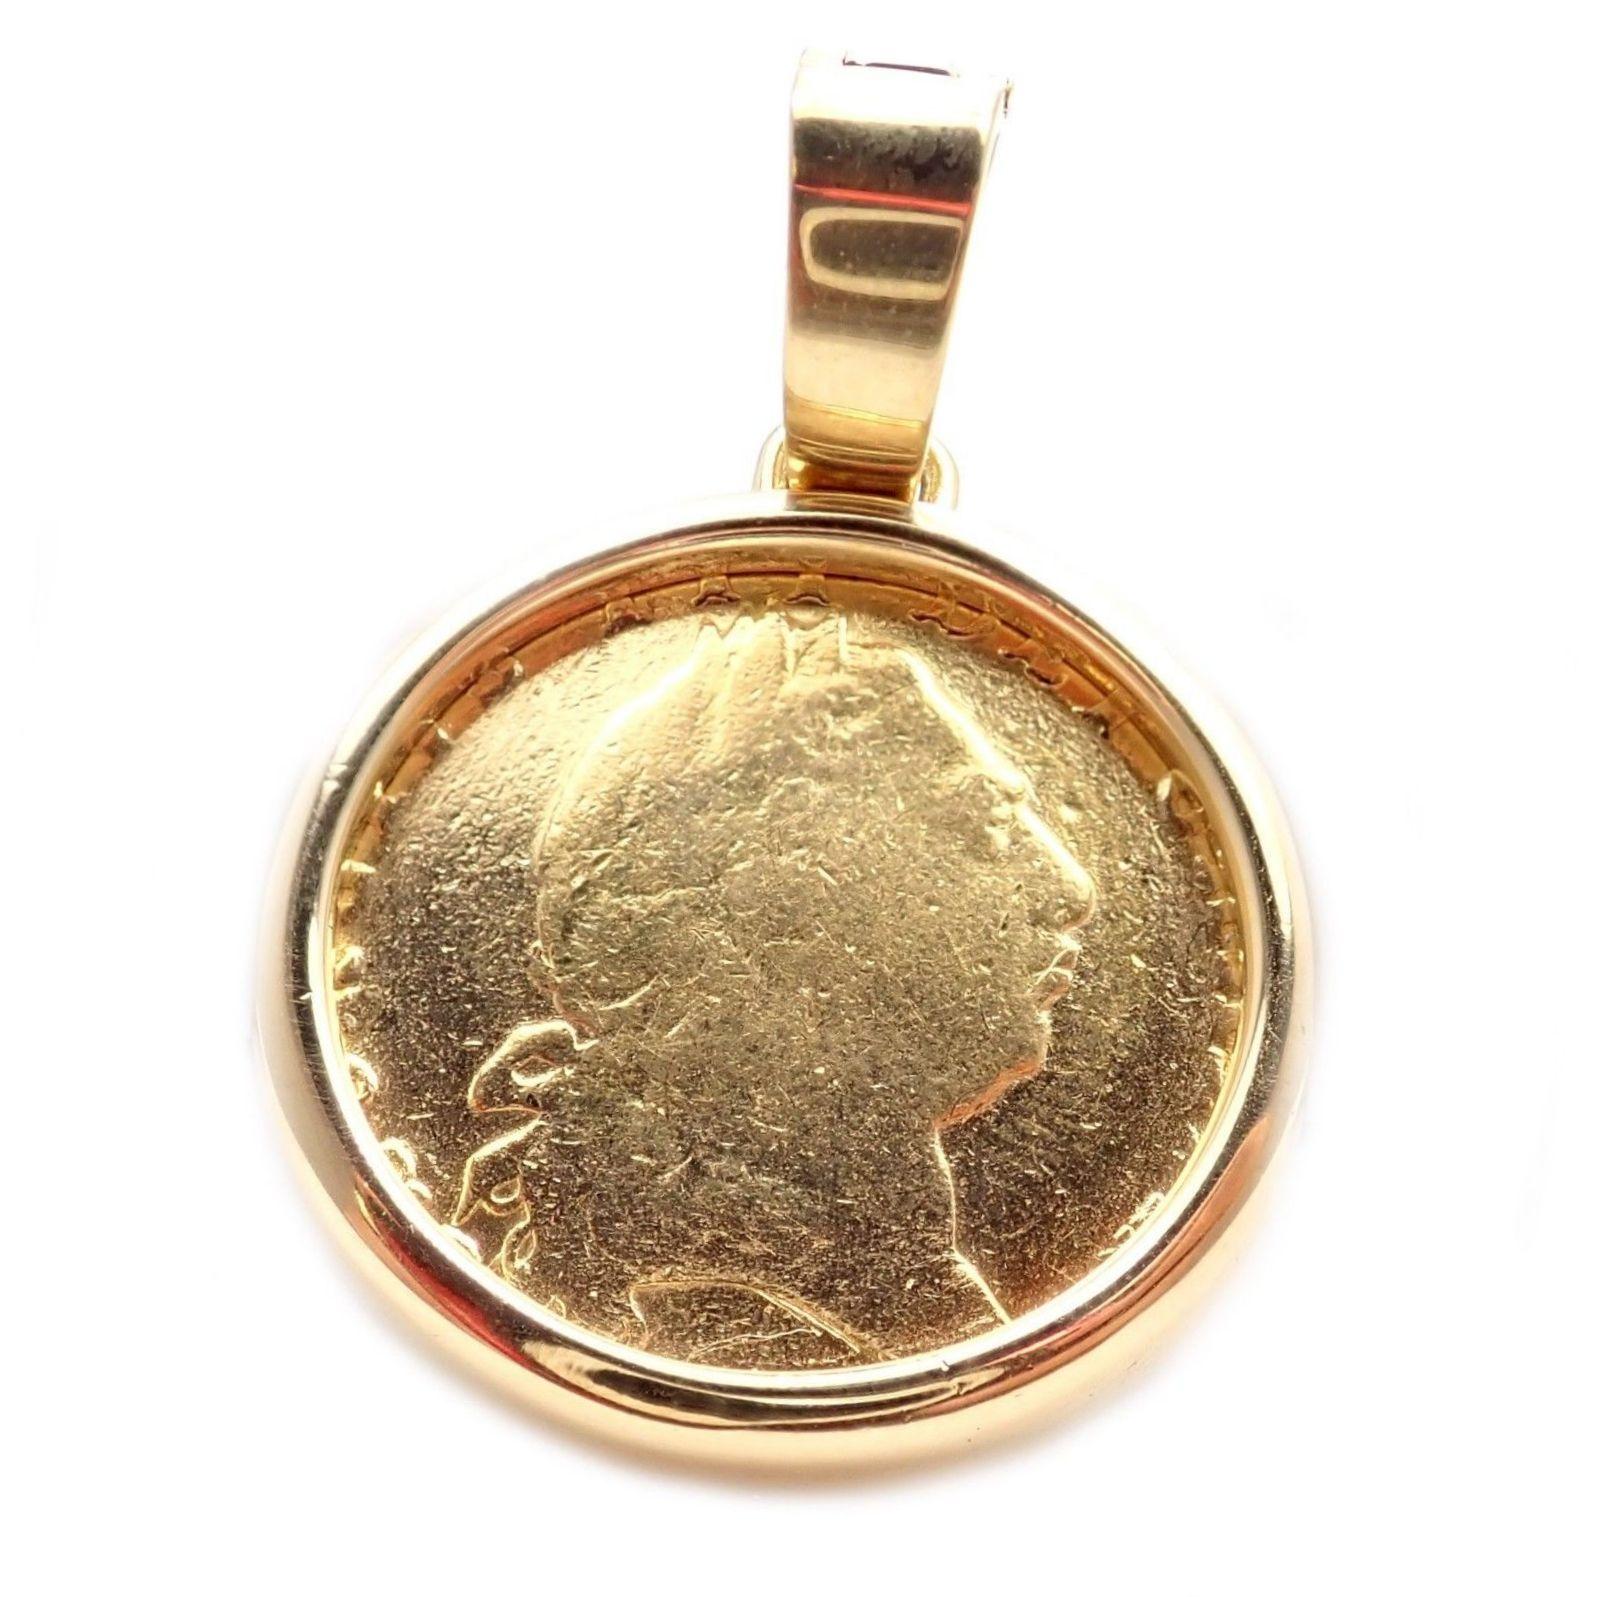 Bulgari 18k yellow gold with 22k Gold English King George III coin pendant link chain necklace.
Measurements: Chain Length: 17.5